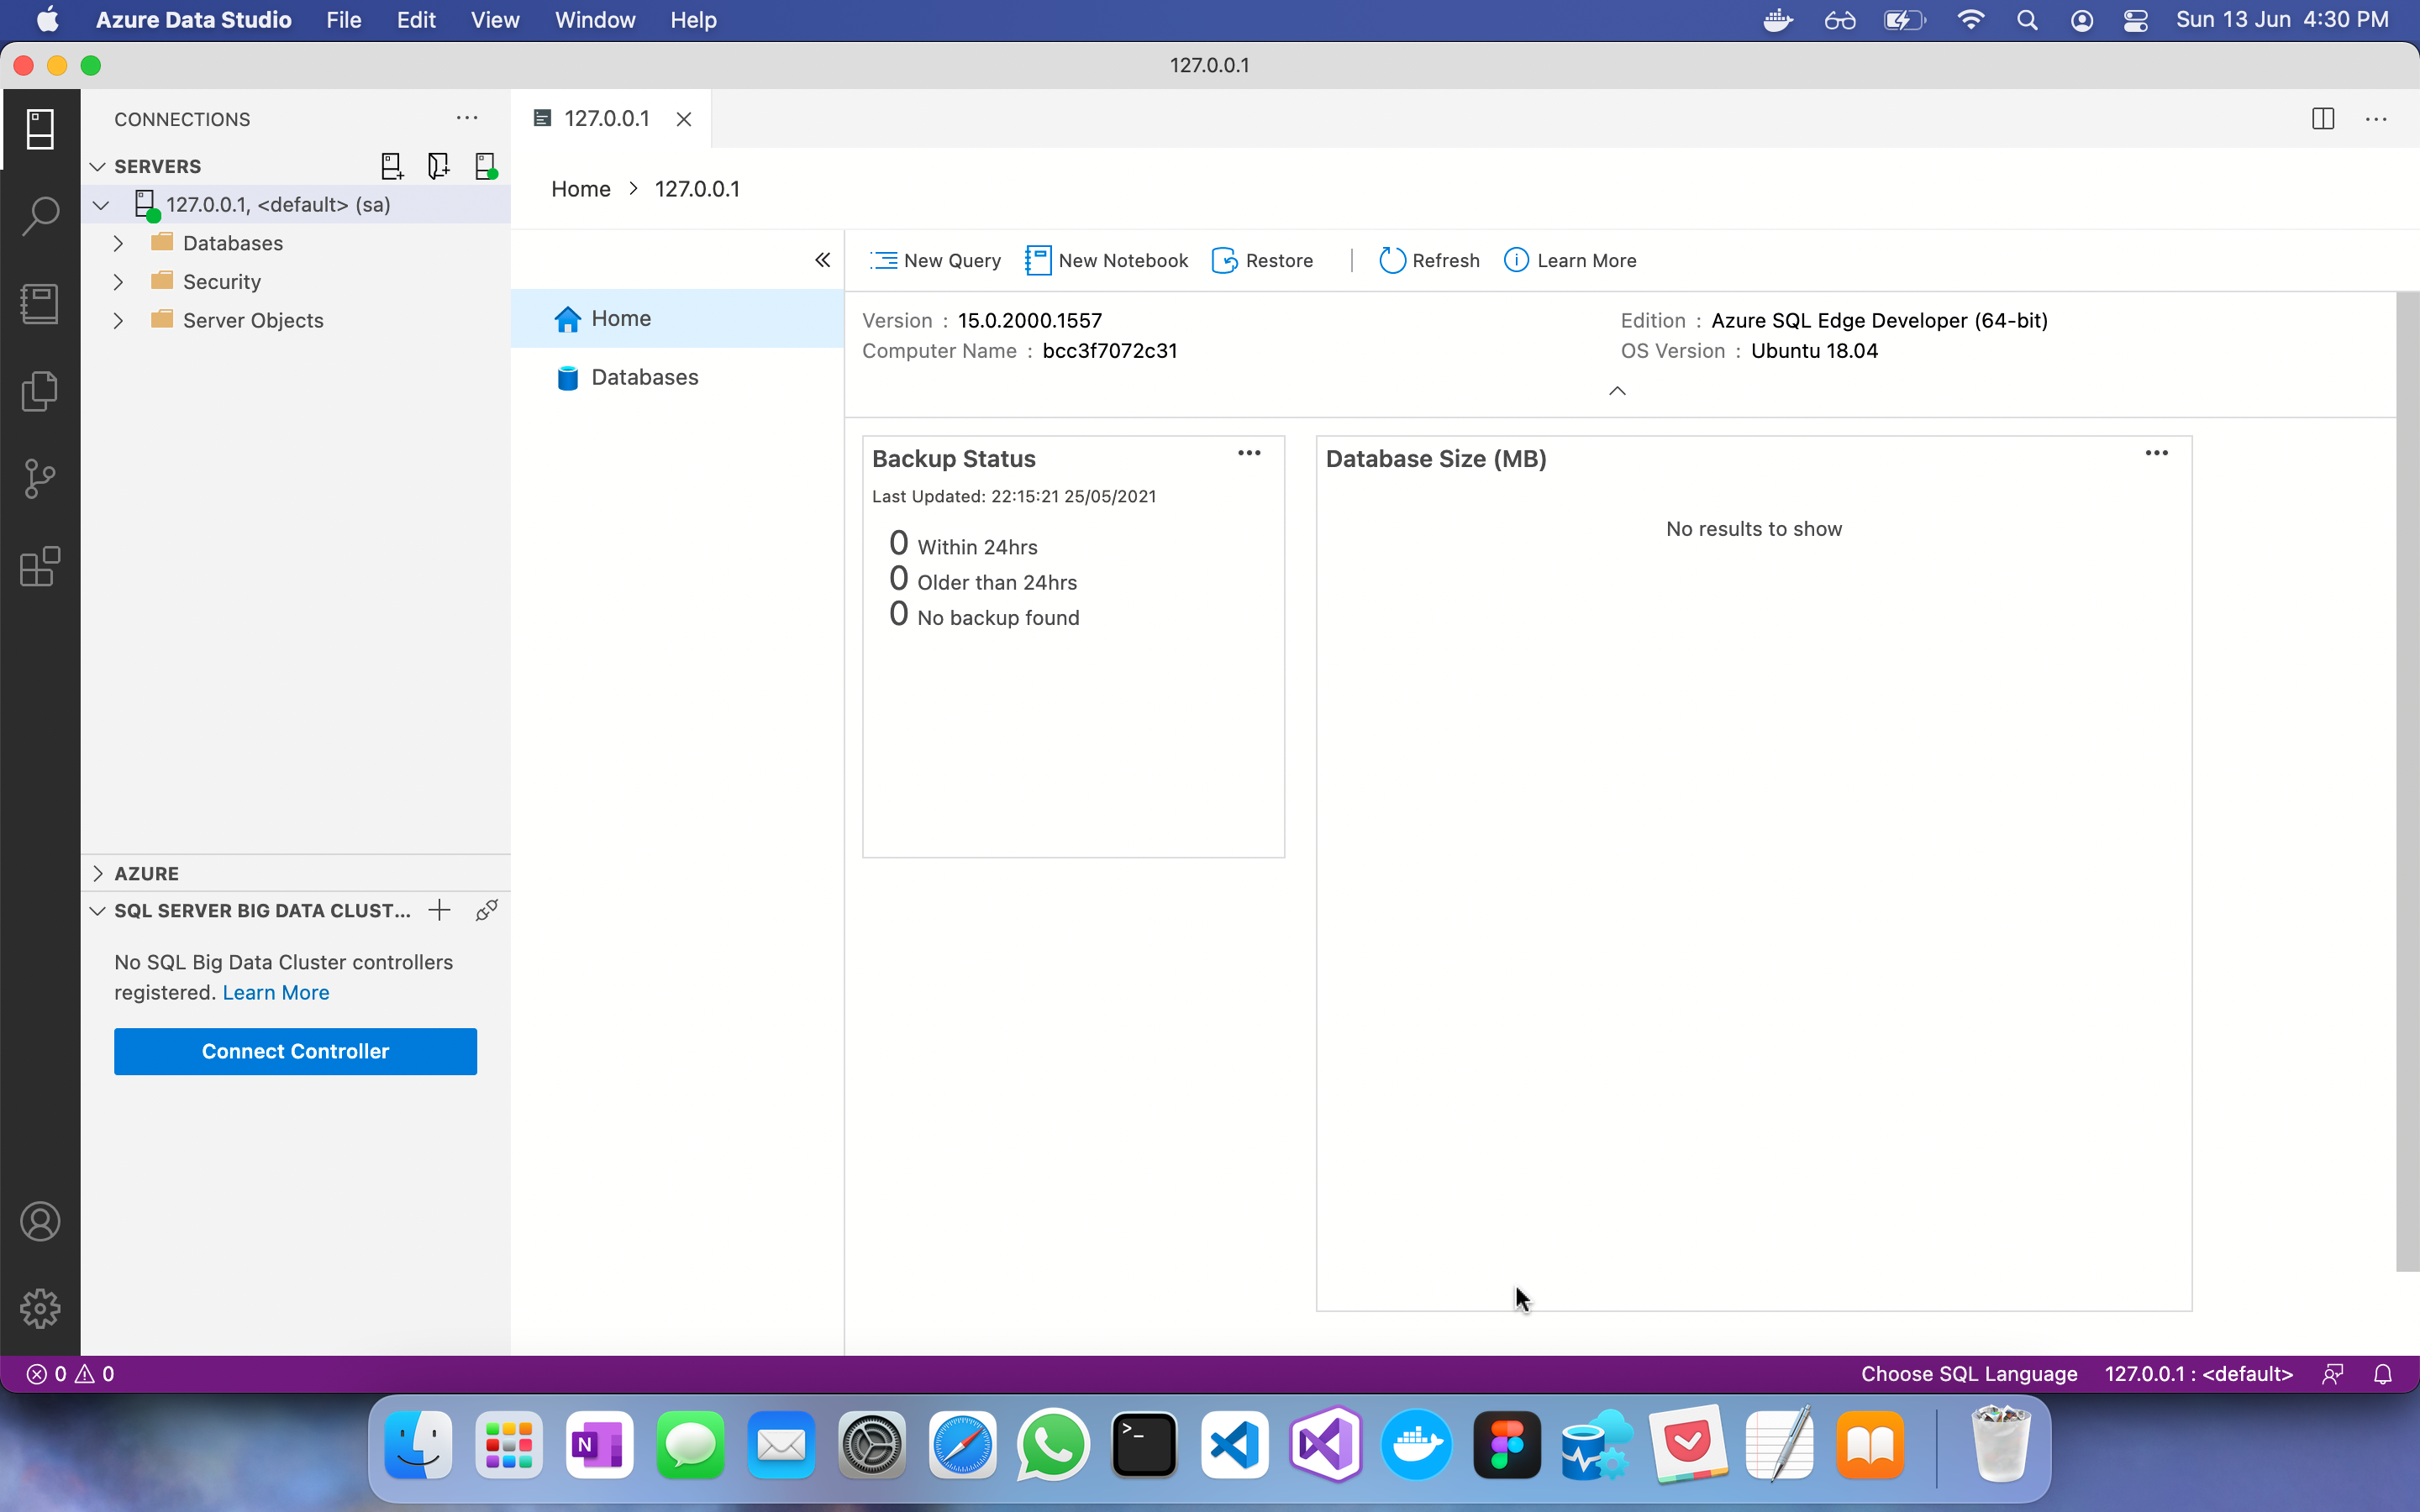 setting up masterpage visual studio for mac os